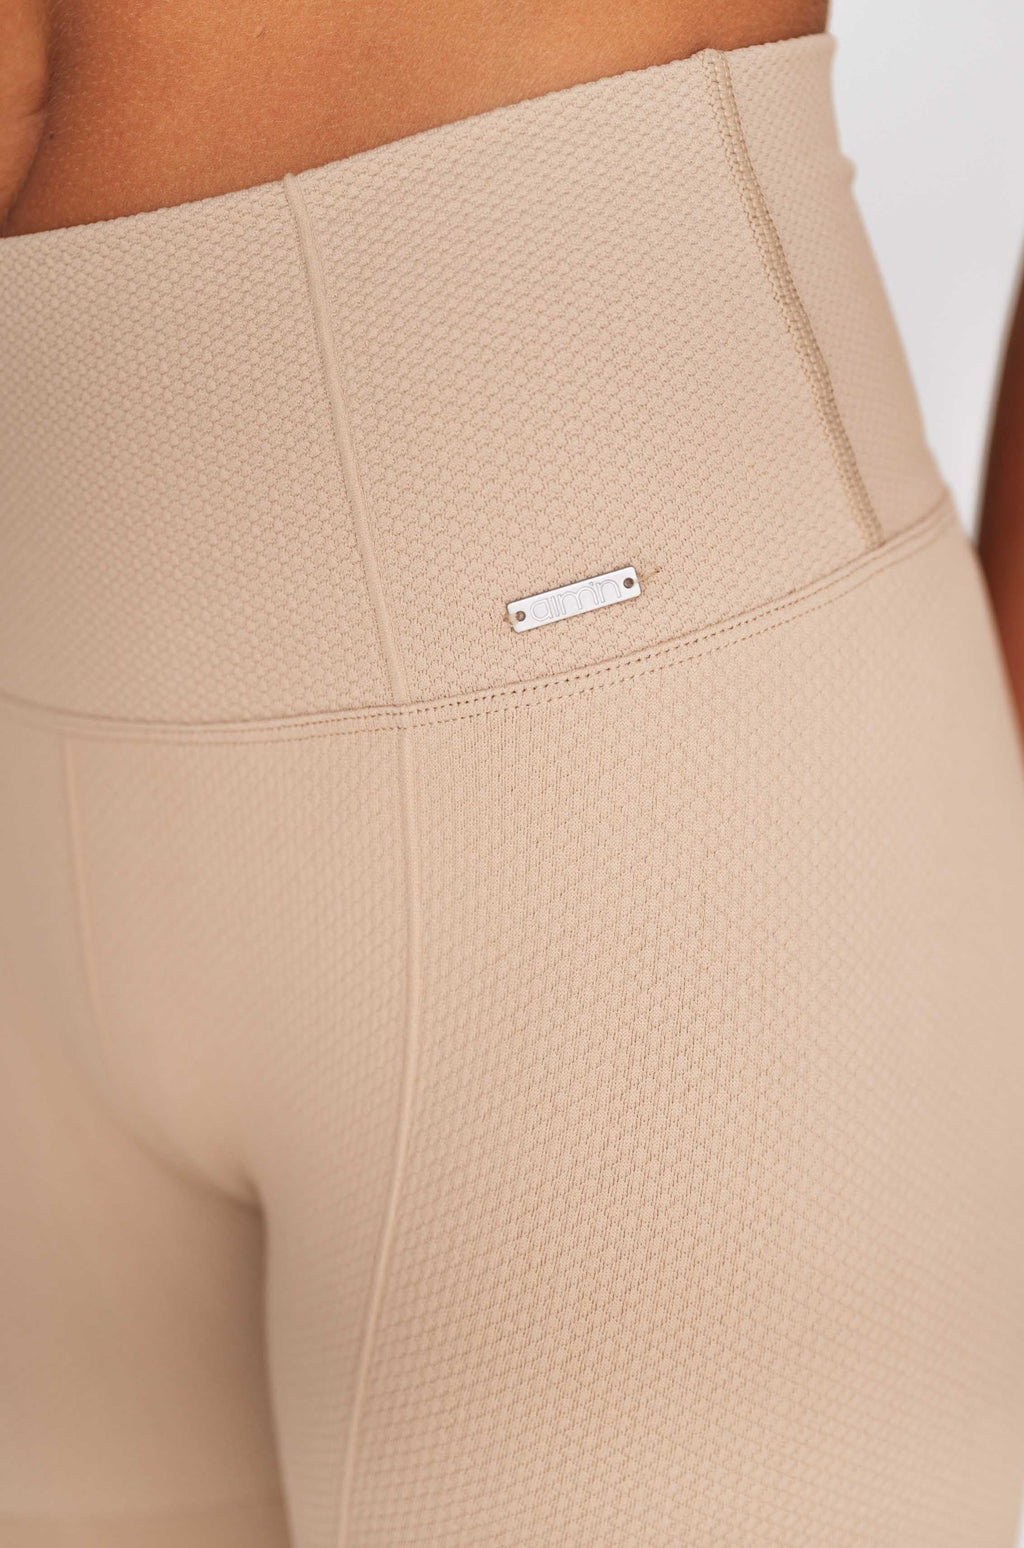 Solid Beige Luxe Seamless Bike Shorts